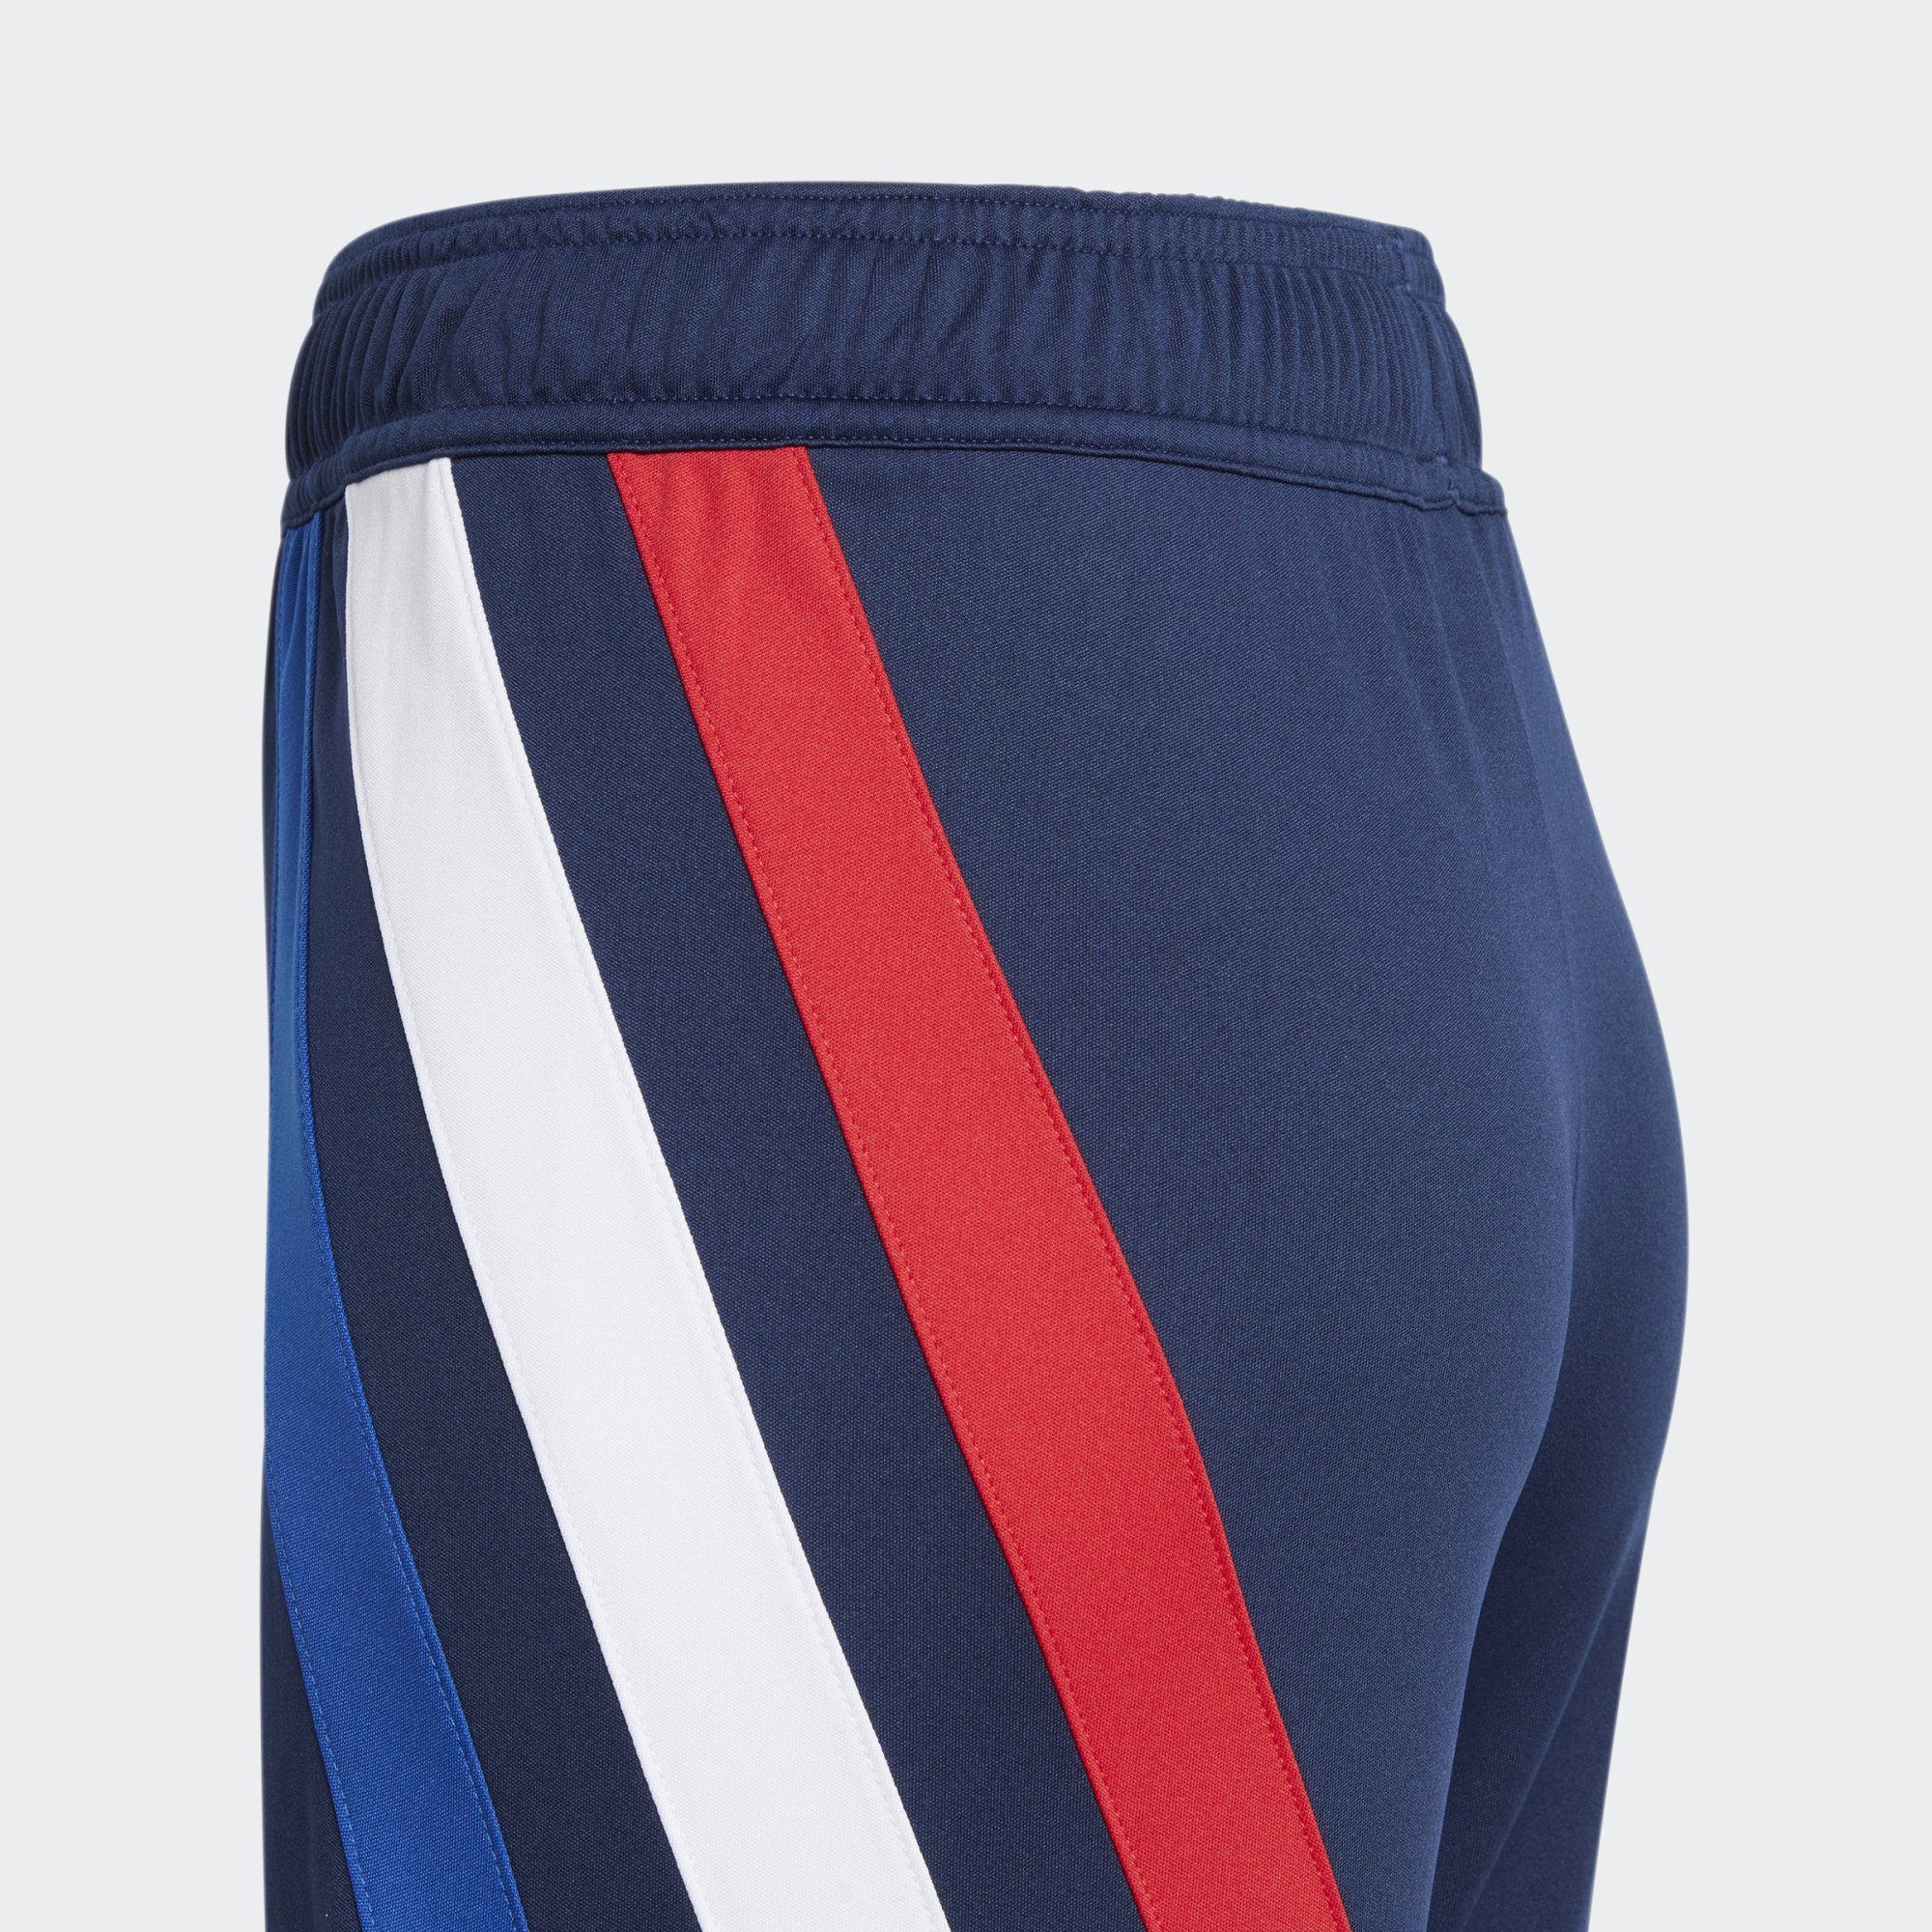 Red 23 adidas / Navy Blue Collegiate Royal FORTORE / / Funktionsshorts Team SHORTS Performance Blue 2 Team White